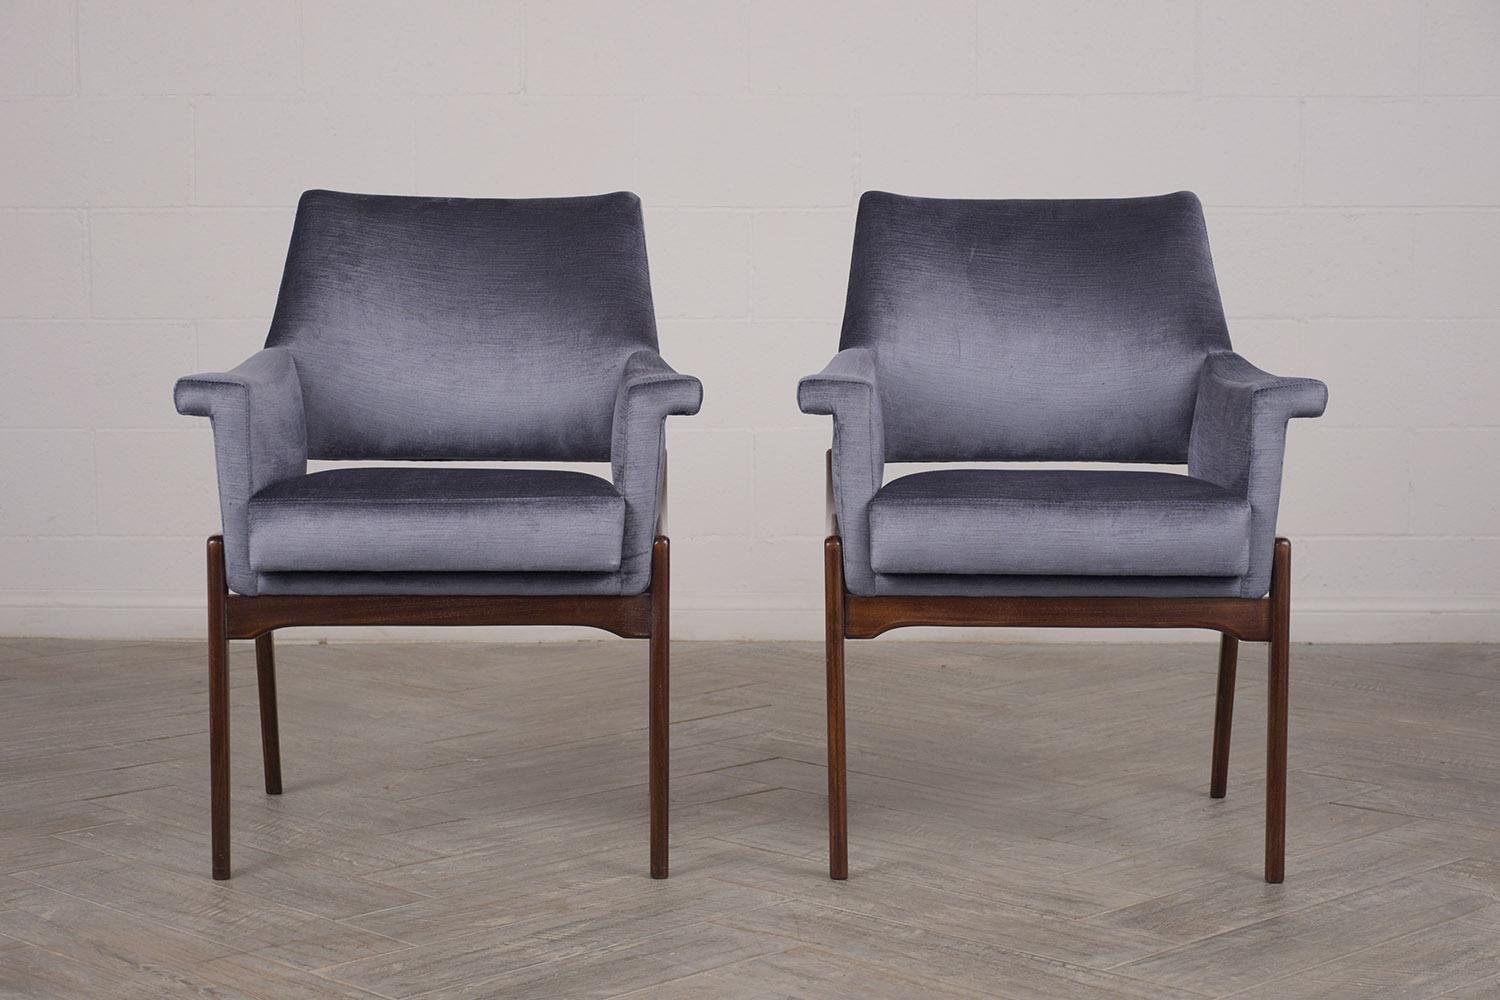 Pair of Modern Rosewood Chairs with Lacquered Finish 14